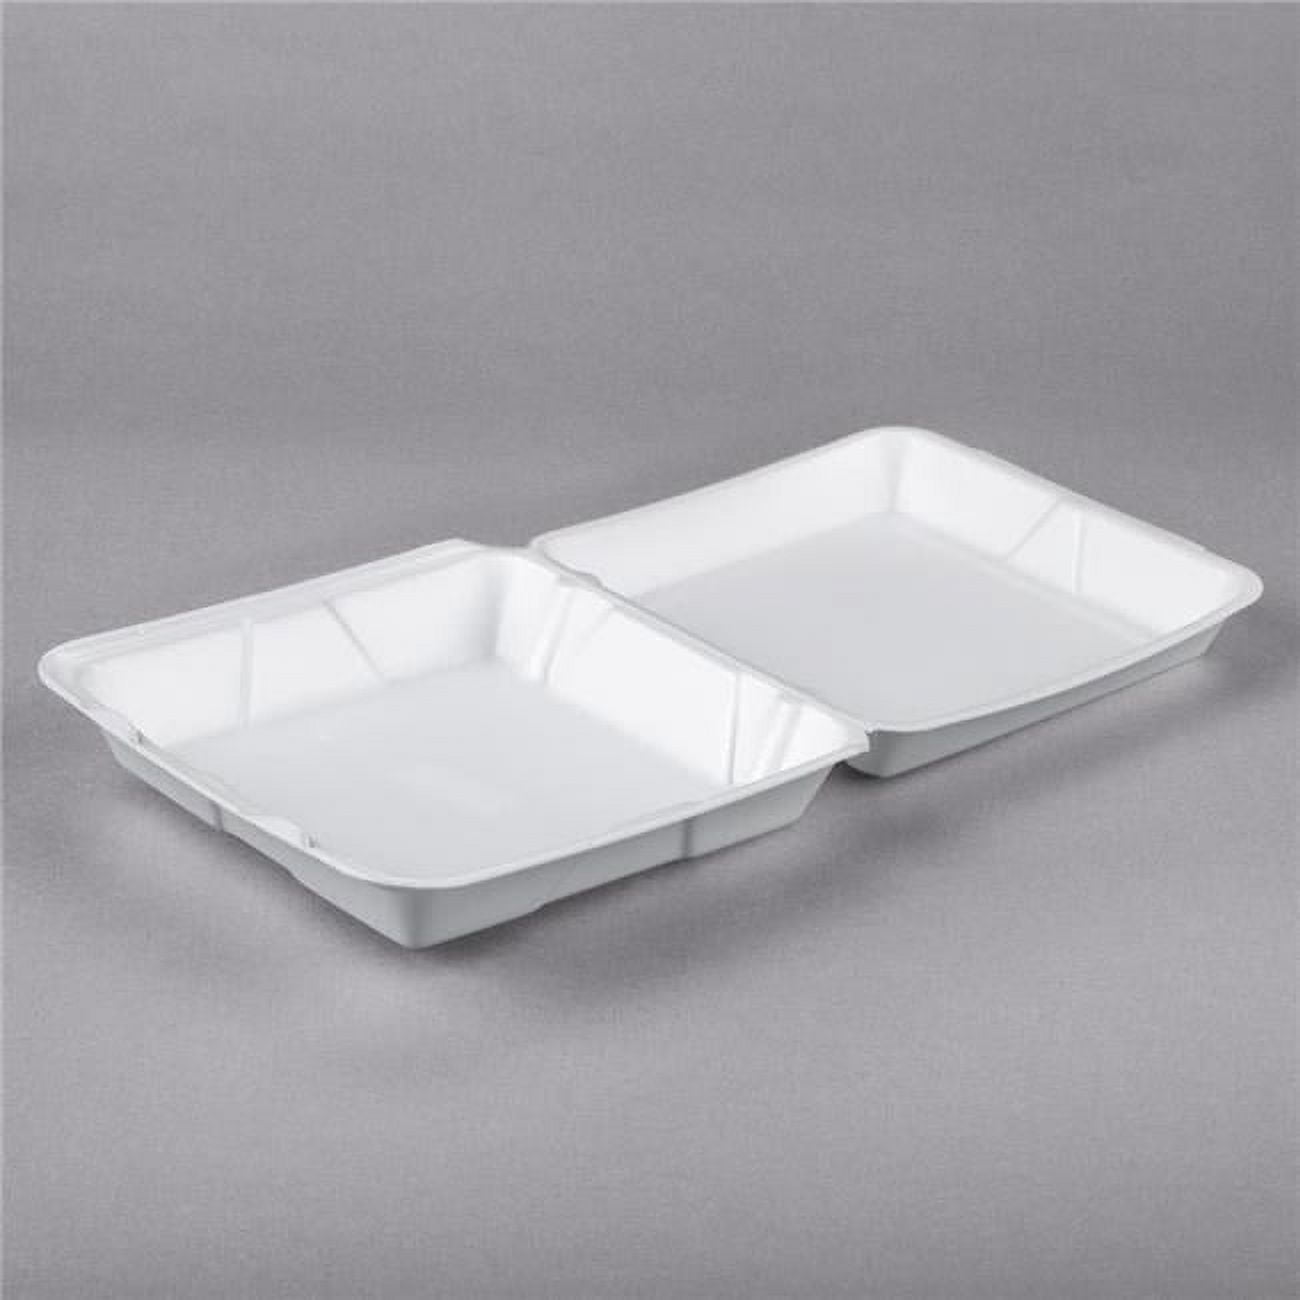 95ht1r Cpc 1-compartment Container White Hinged Foam Lid - Large, Case Of 200